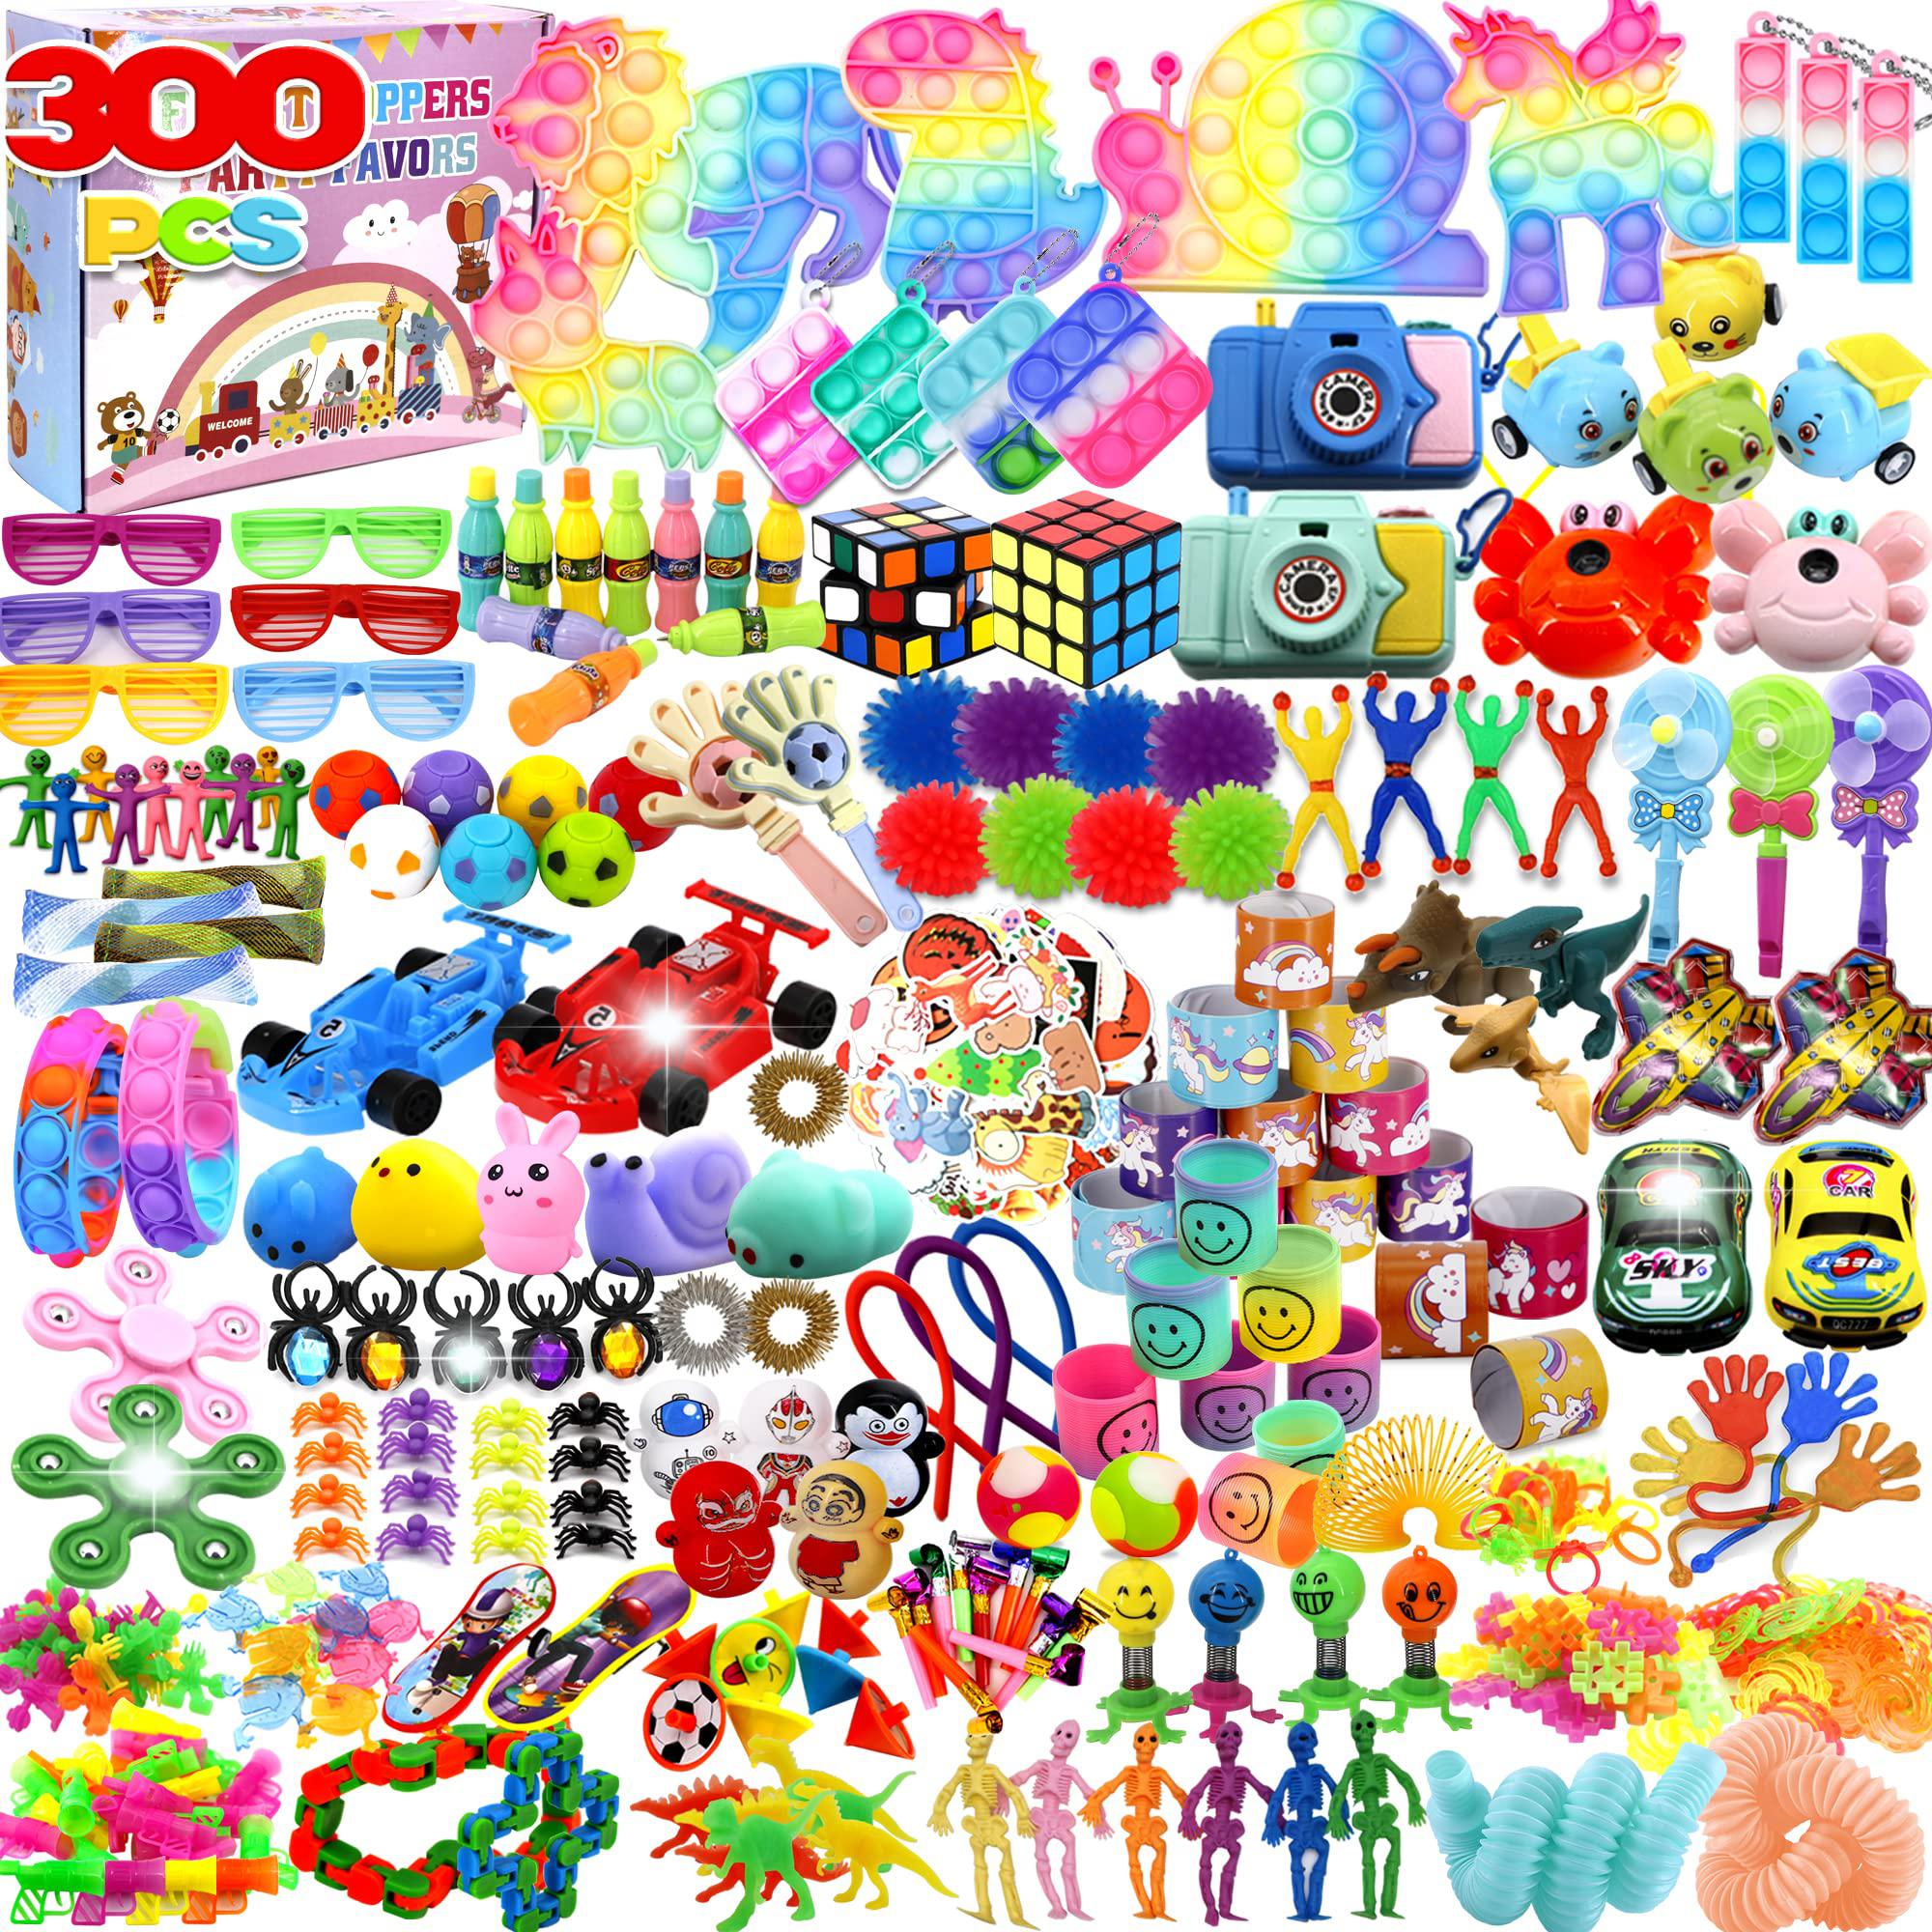 zjll 300 pcs party favors for kids 3-5 4-8, fidget toys pack, party toys assortment, treasure box birthday party, goodie bag stuff